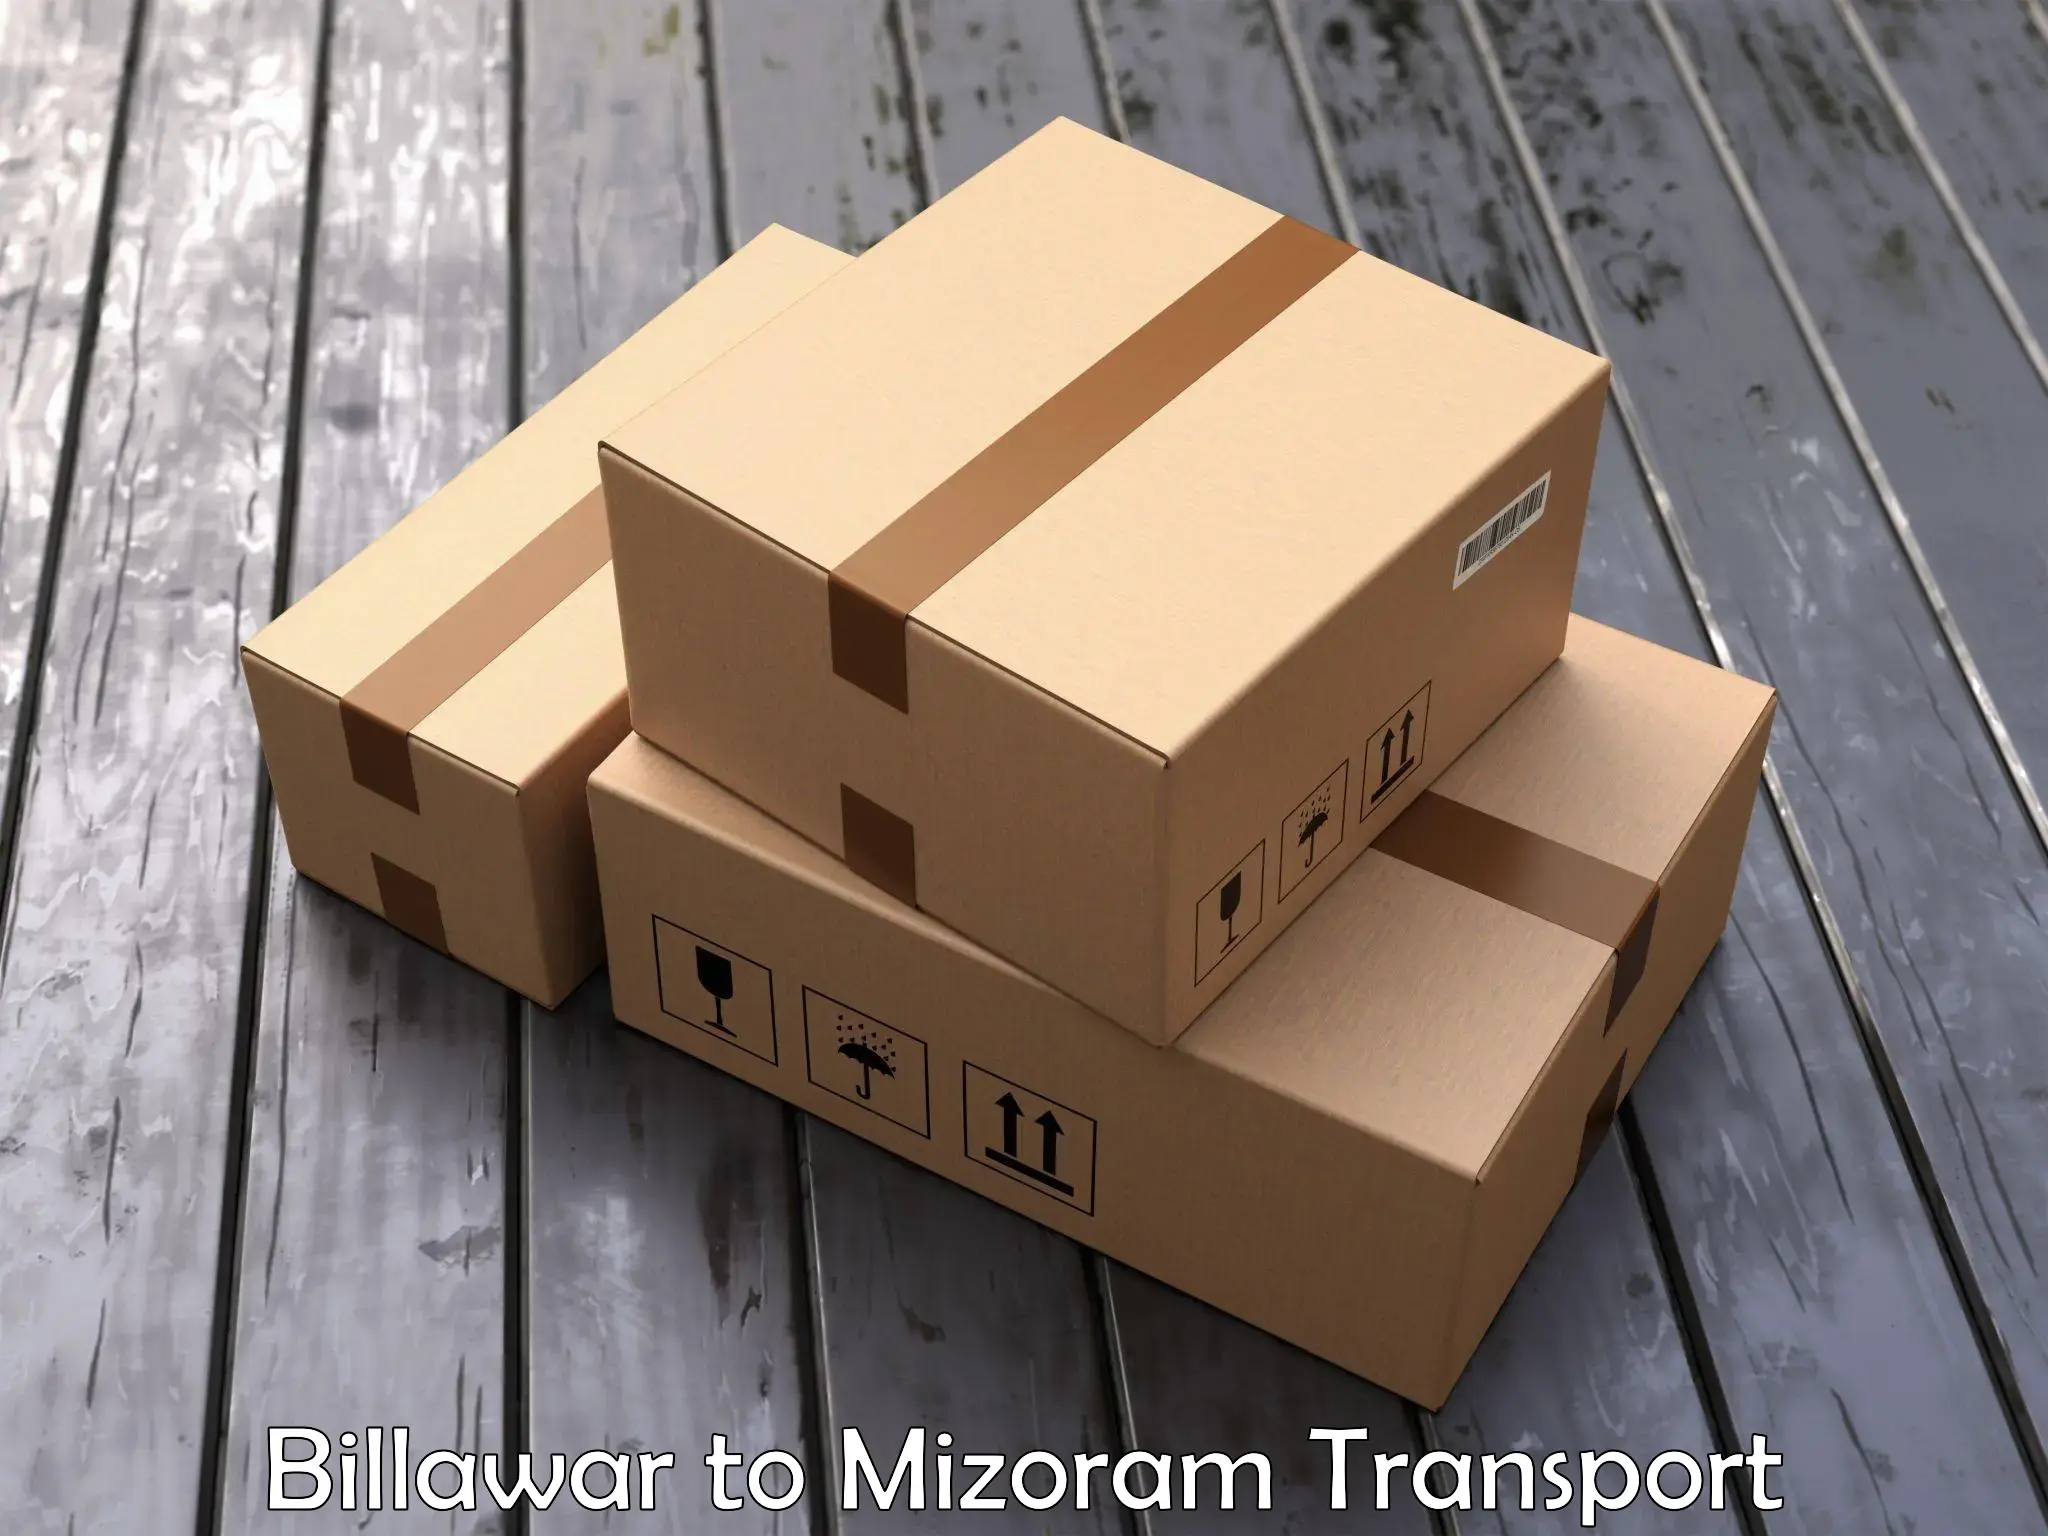 Delivery service in Billawar to Aizawl